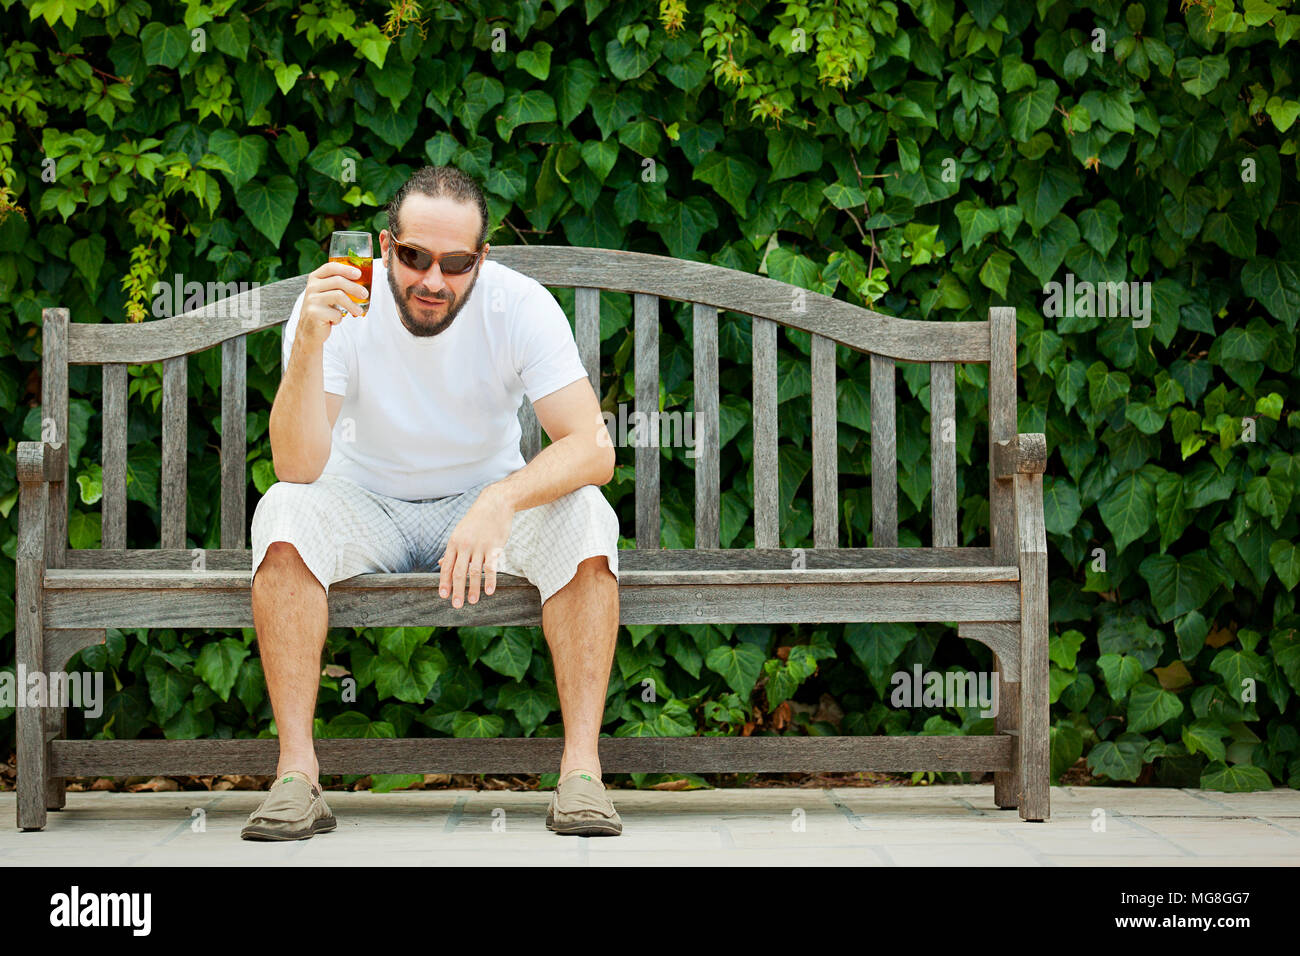 Portrait shoot outdoors of man sitting on wooden bench Stock Photo